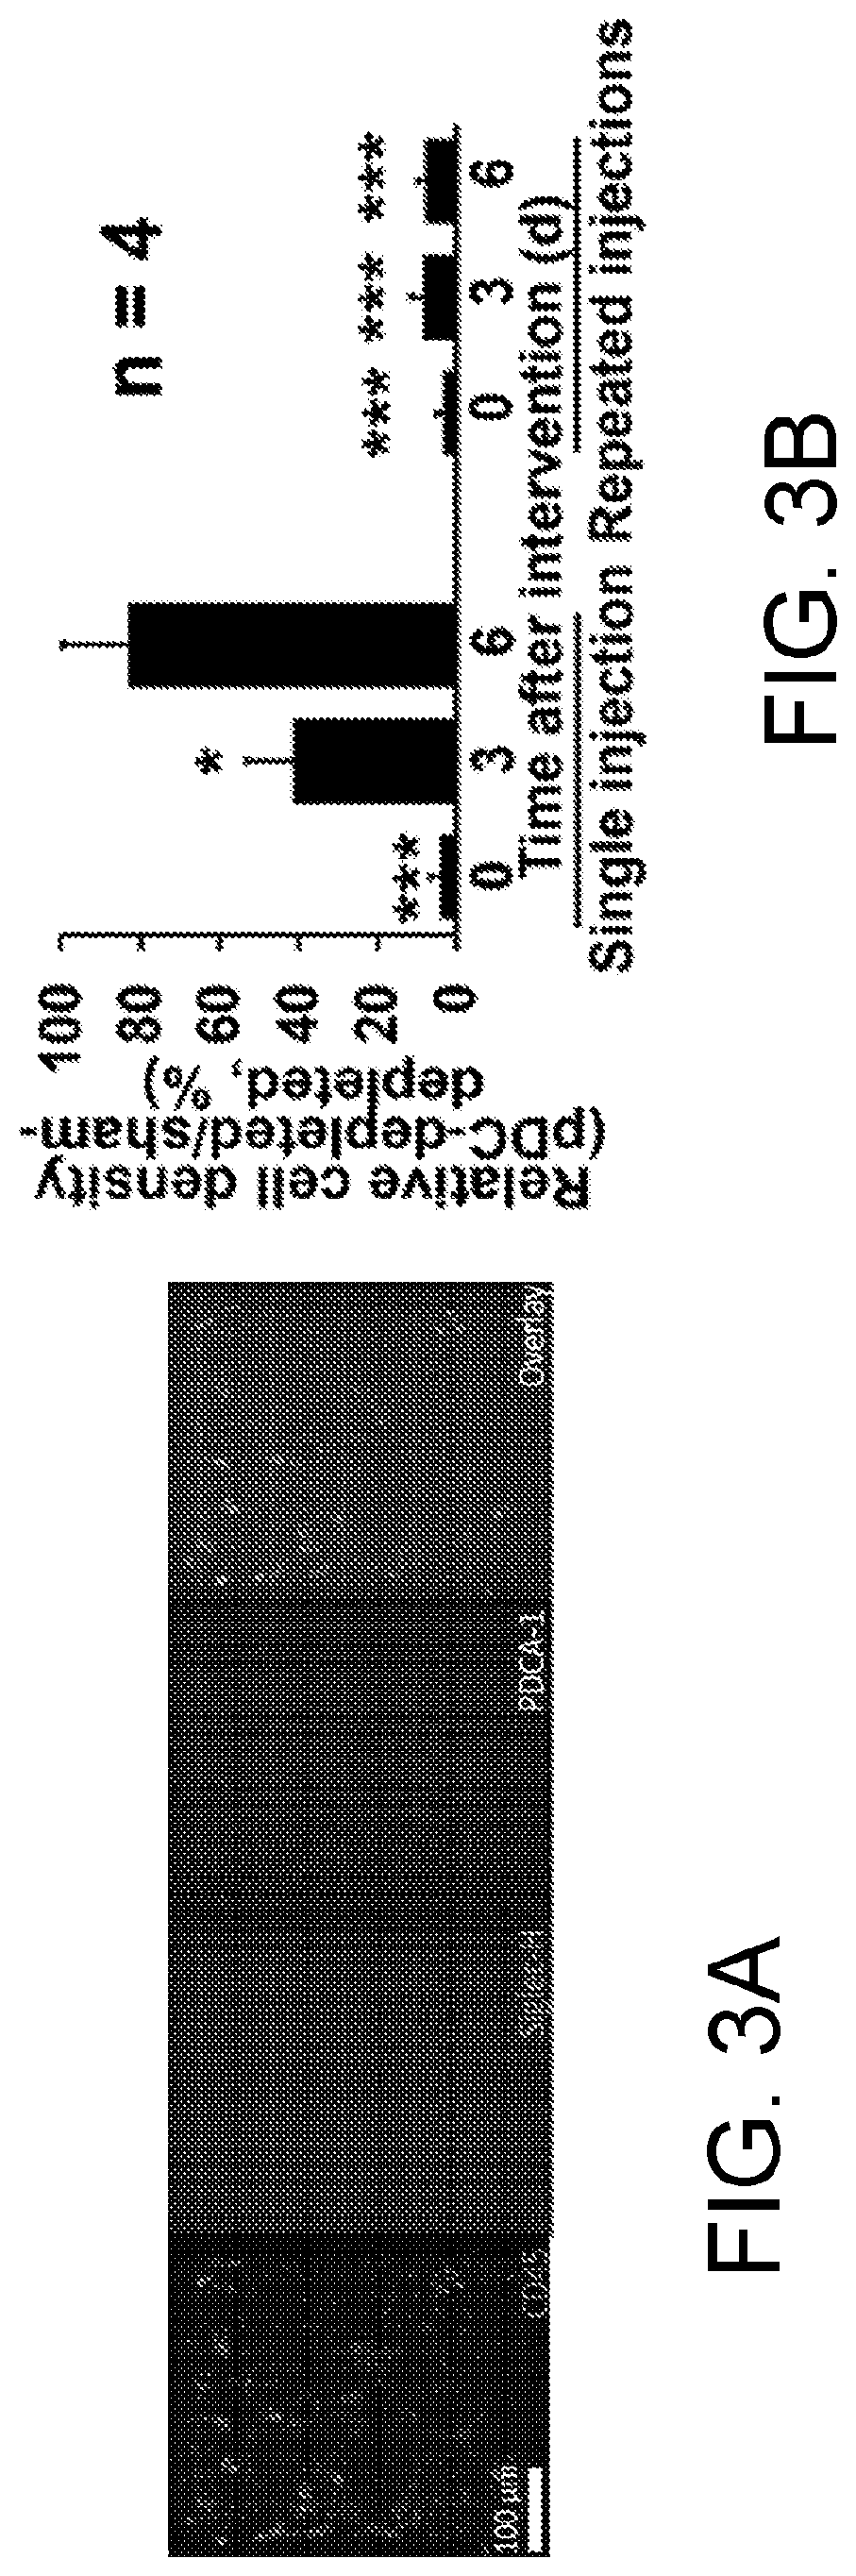 Adoptive transfer of plasmacytoid dendritic cells to prevent or treat ocular diseases and conditions